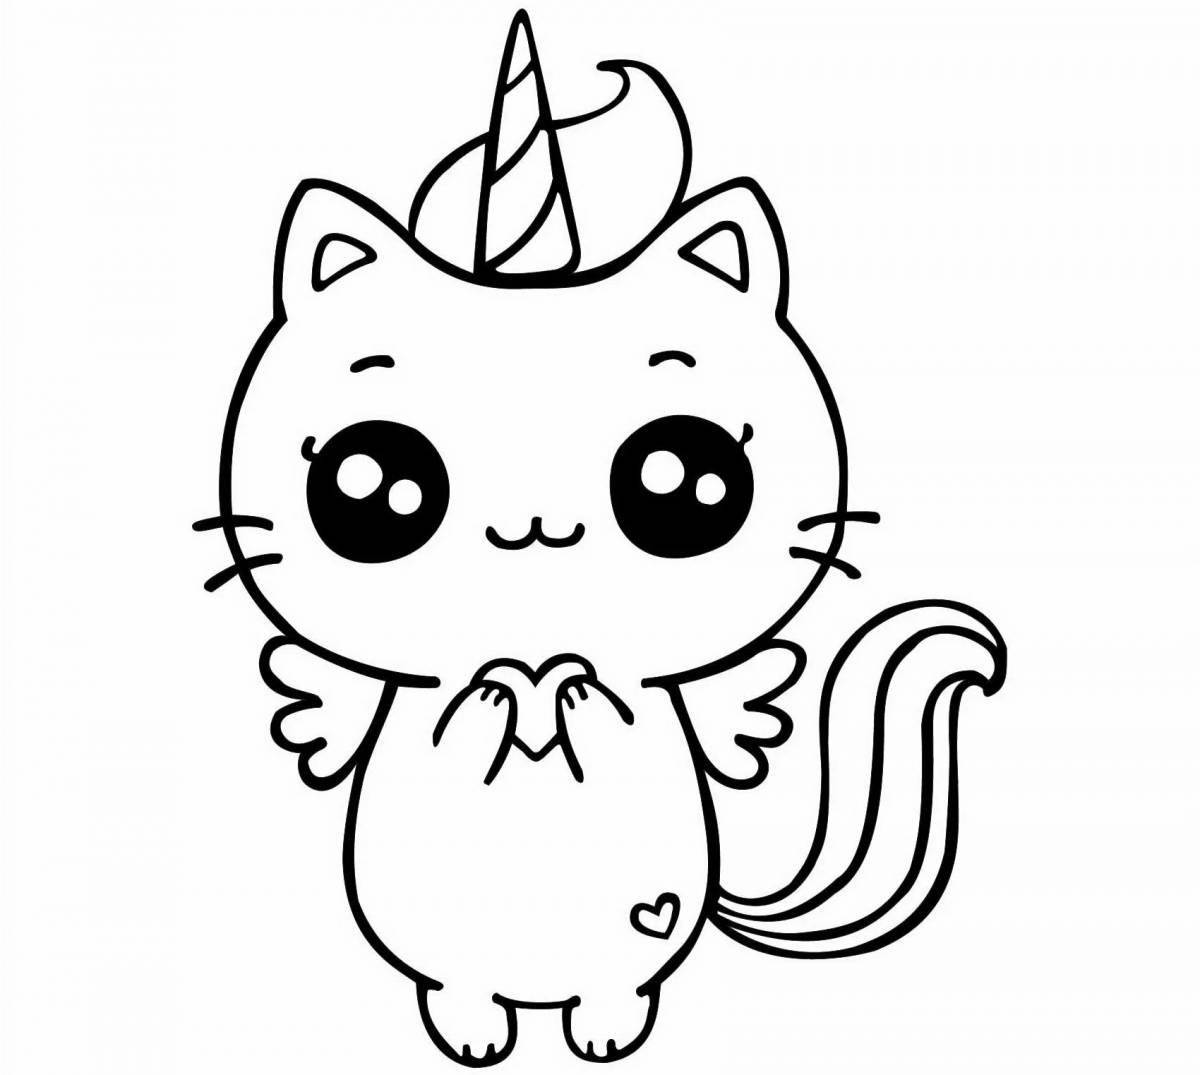 Adorable unicorn cat coloring book for kids